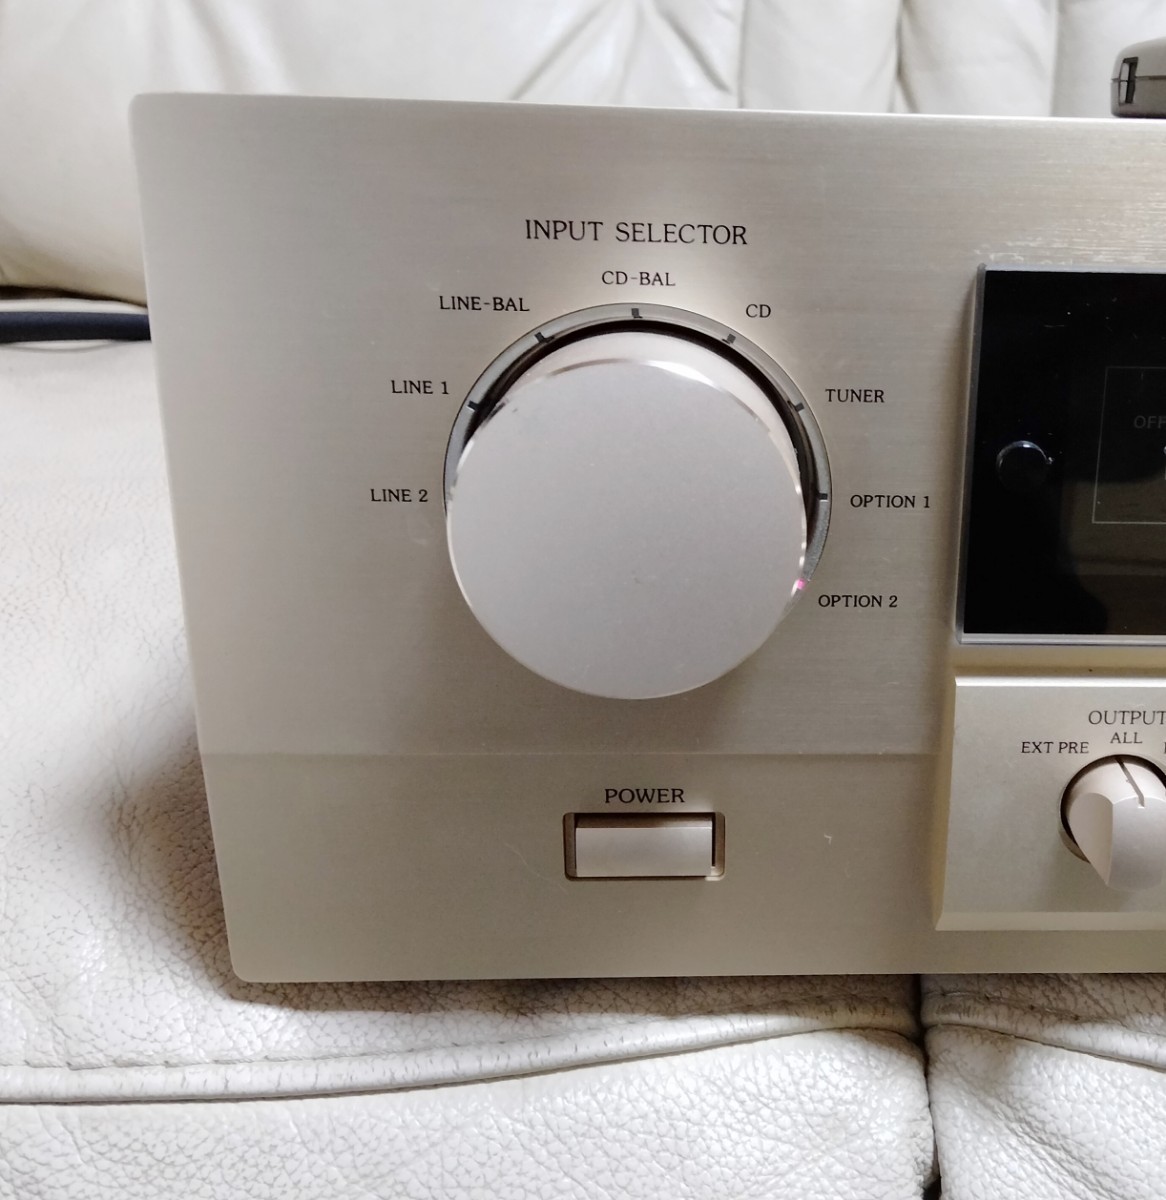 Accuphase アキュフェーズ コントロールアンプ C-2000 _画像2